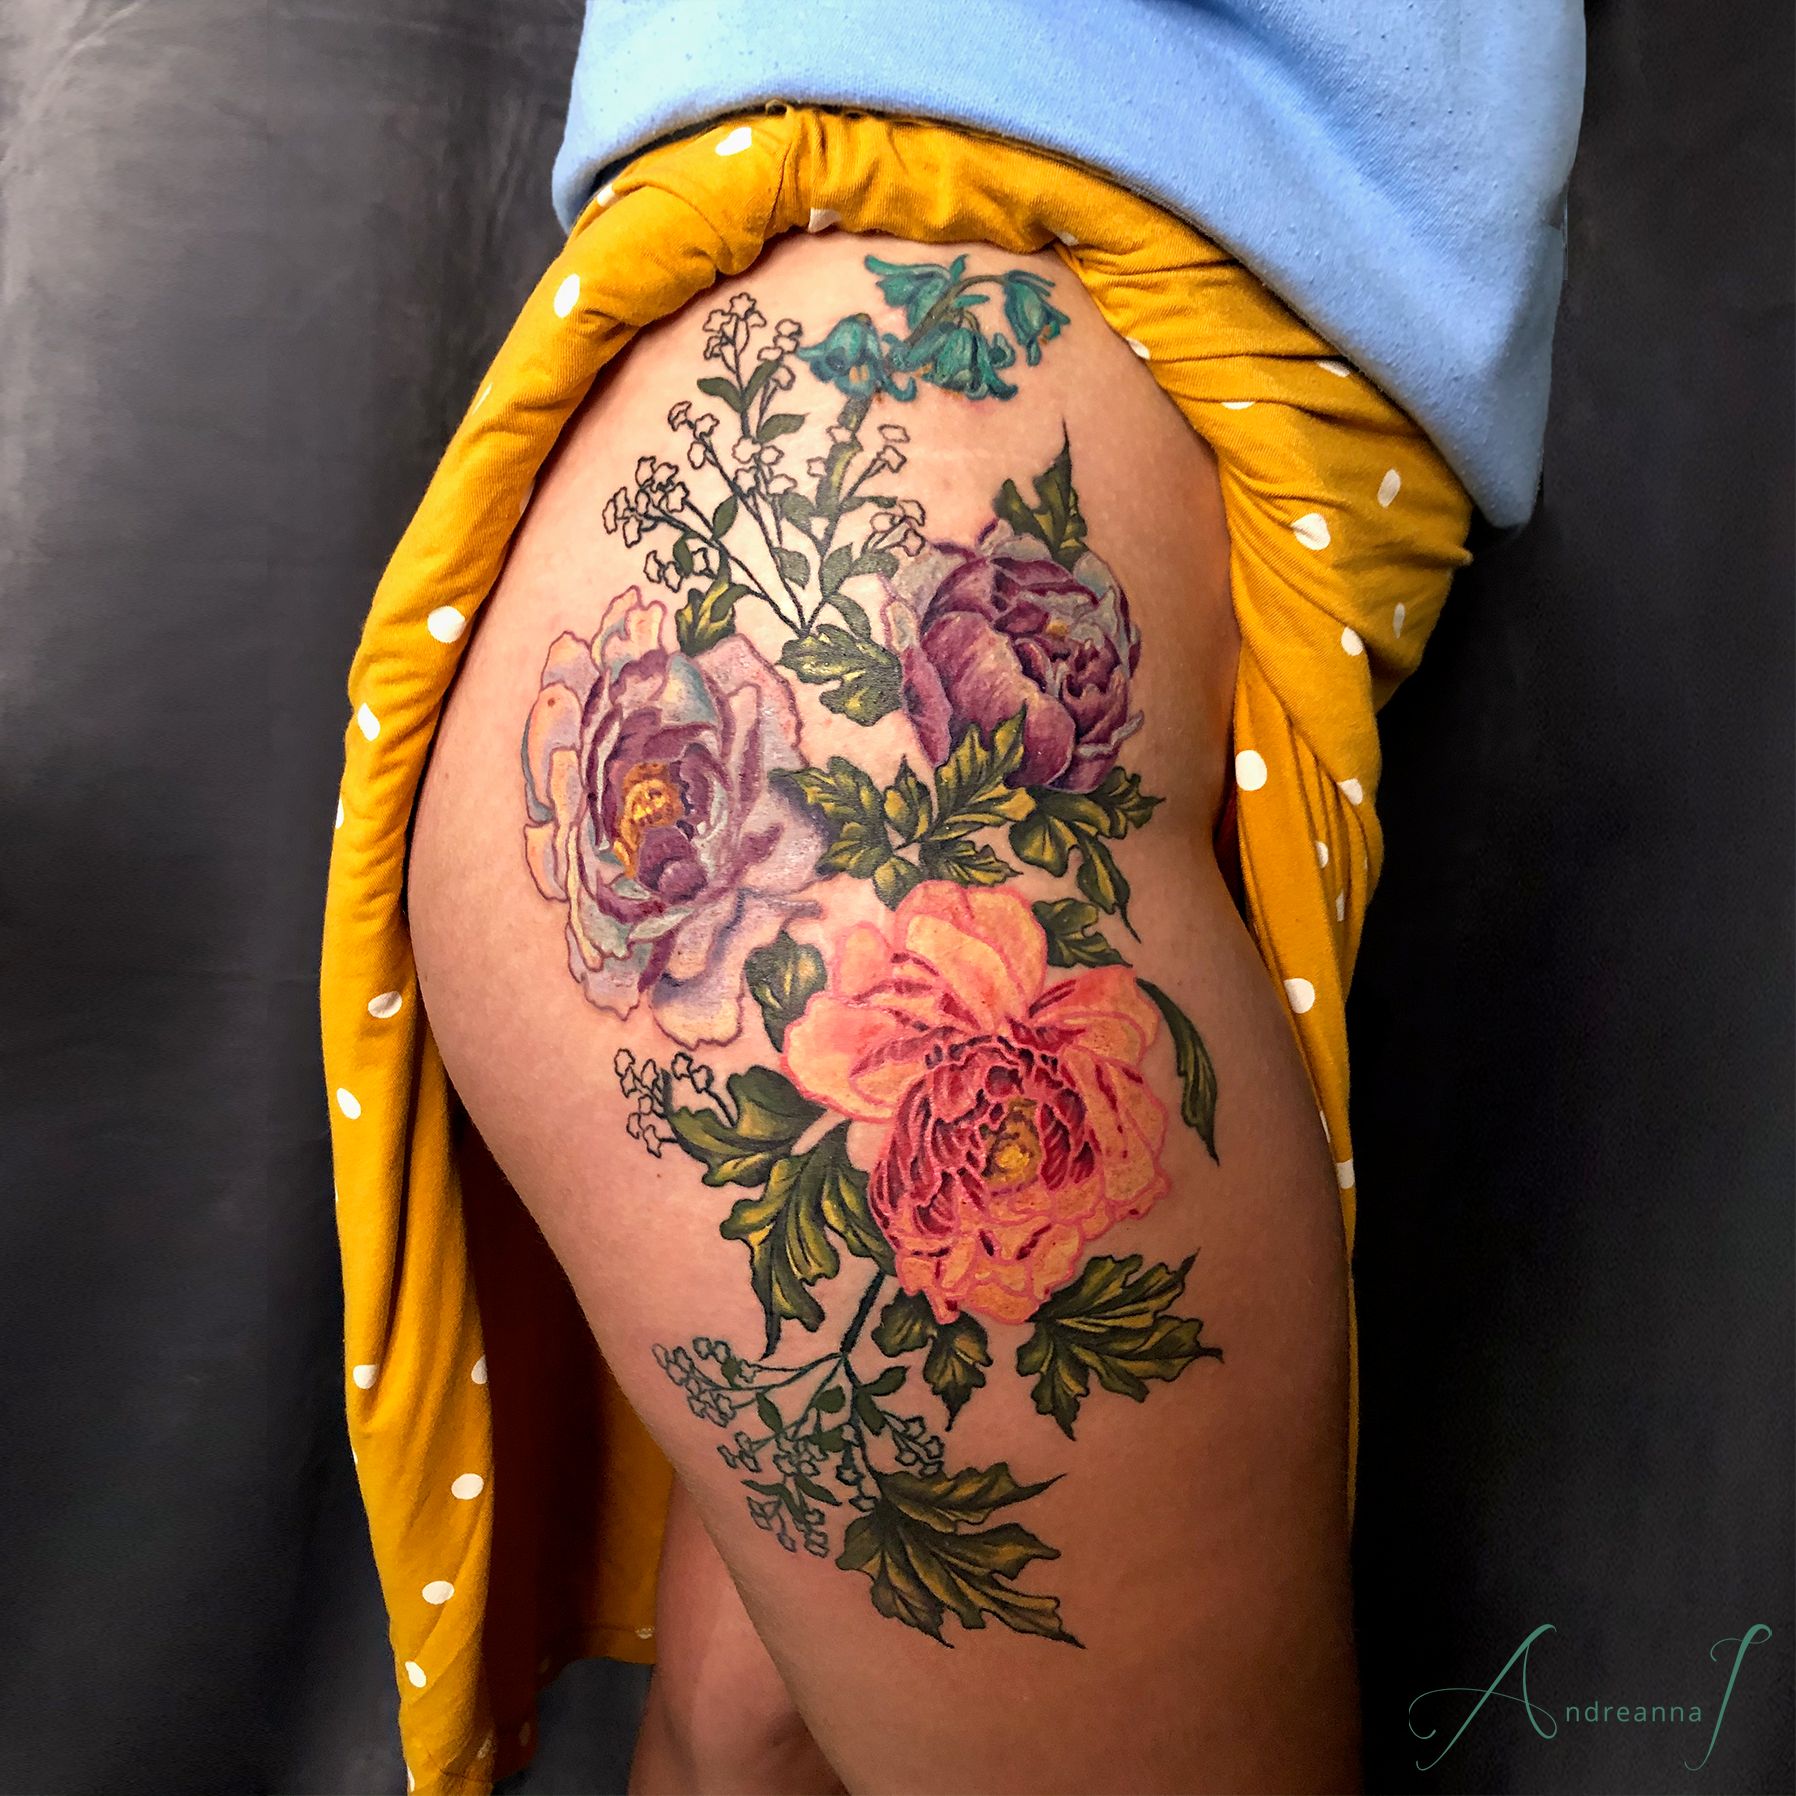 Tattoo uploaded by Andreanna Iakovidis • Peony Floral Hip and Outer Thigh  Tattoo in Color by Andreanna Iakovidis. #floraltattoo #peony #peonies  #thightattooforwomen #Hiptattooforwomen #floralcascade • Tattoodo